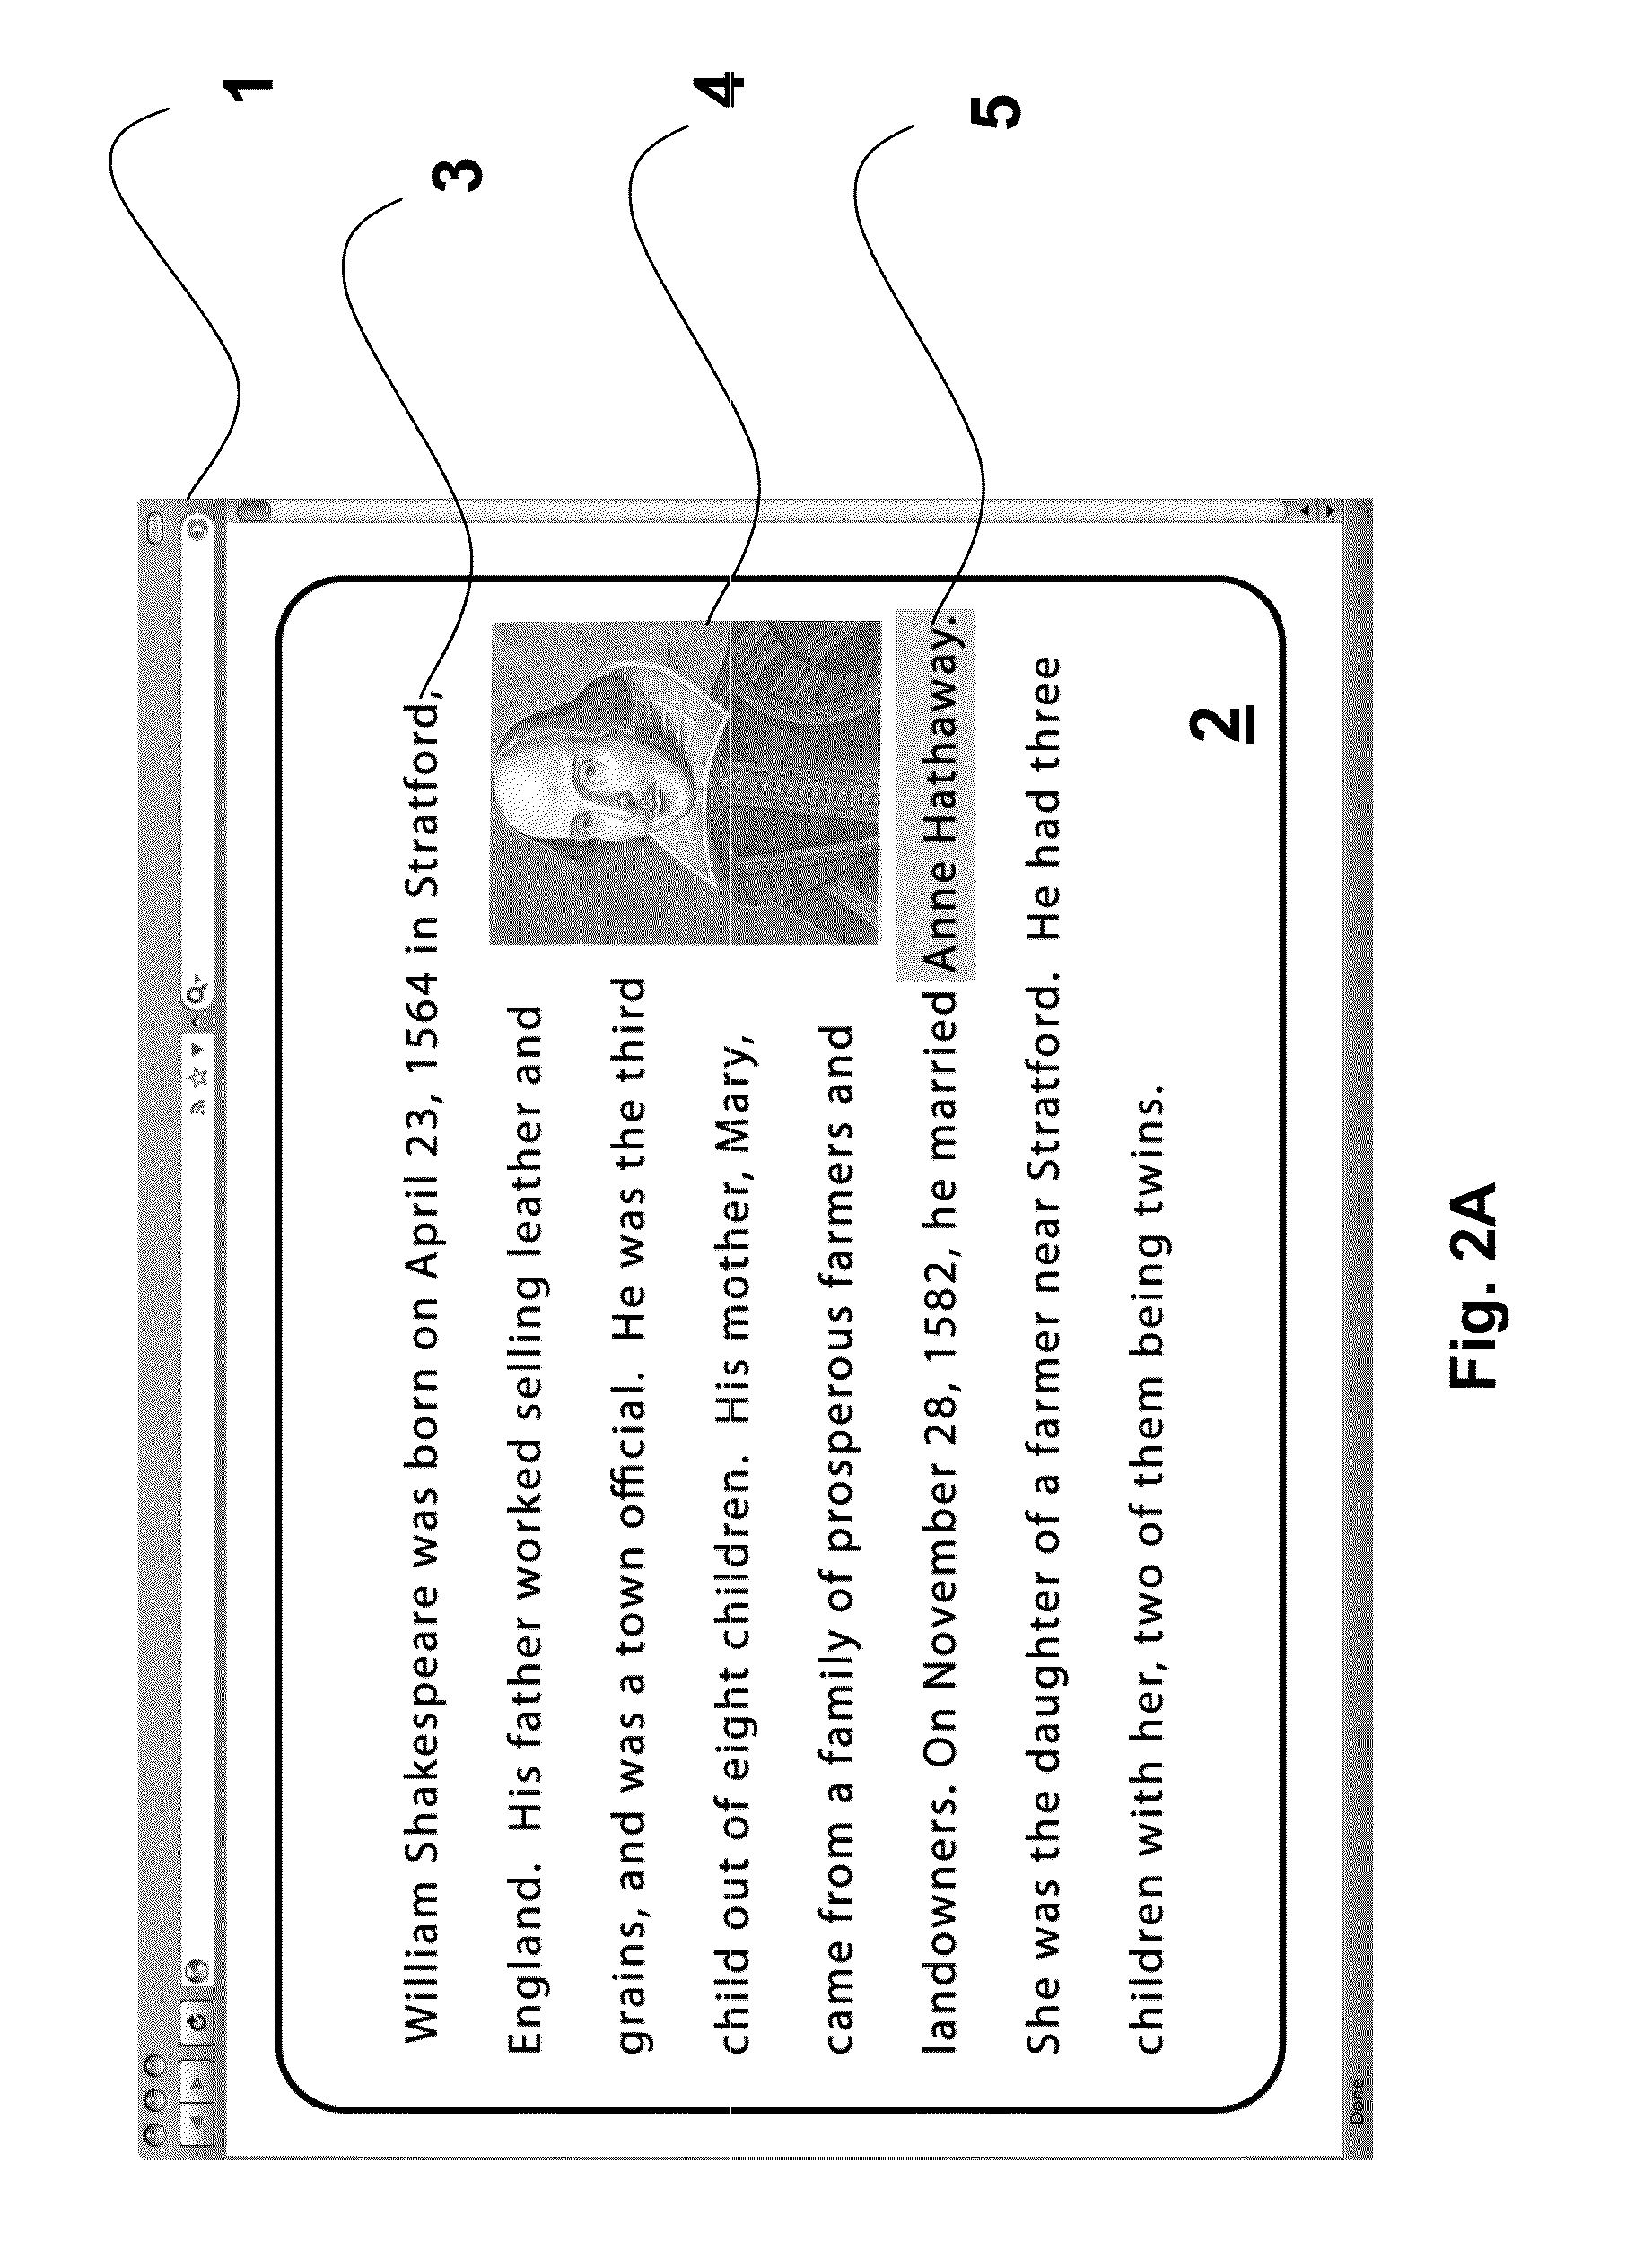 User Extensible Form-Based Data Association Apparatus